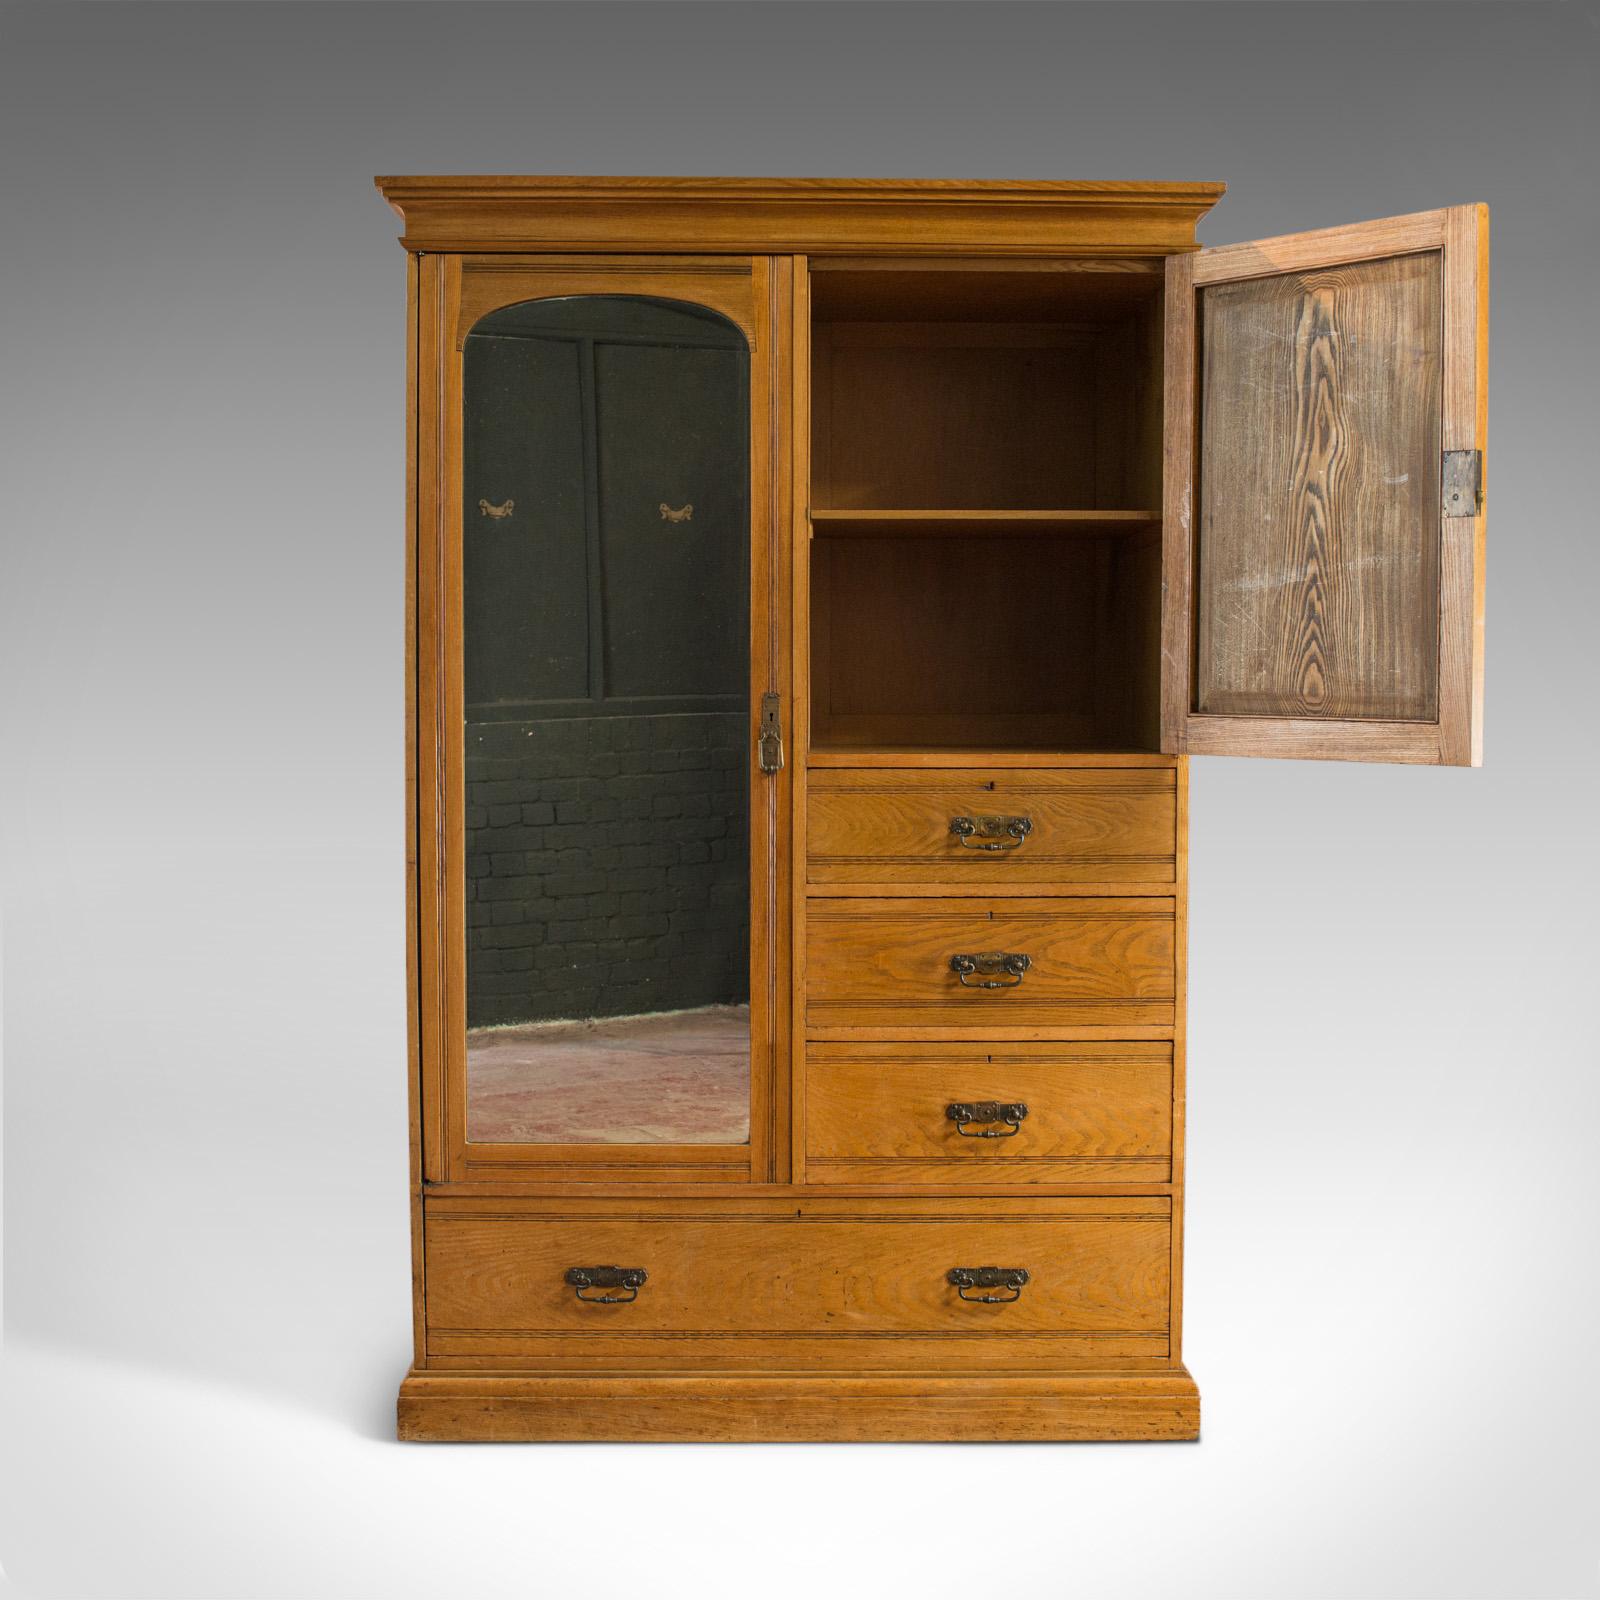 This is an antique wardrobe by Howard and Sons of London. An English, oak linen cupboard, or compactum, dating to the late 19th century, circa 1900.

Crafted in select oak displaying rich biscuit hues with consistent tone
Grain interest